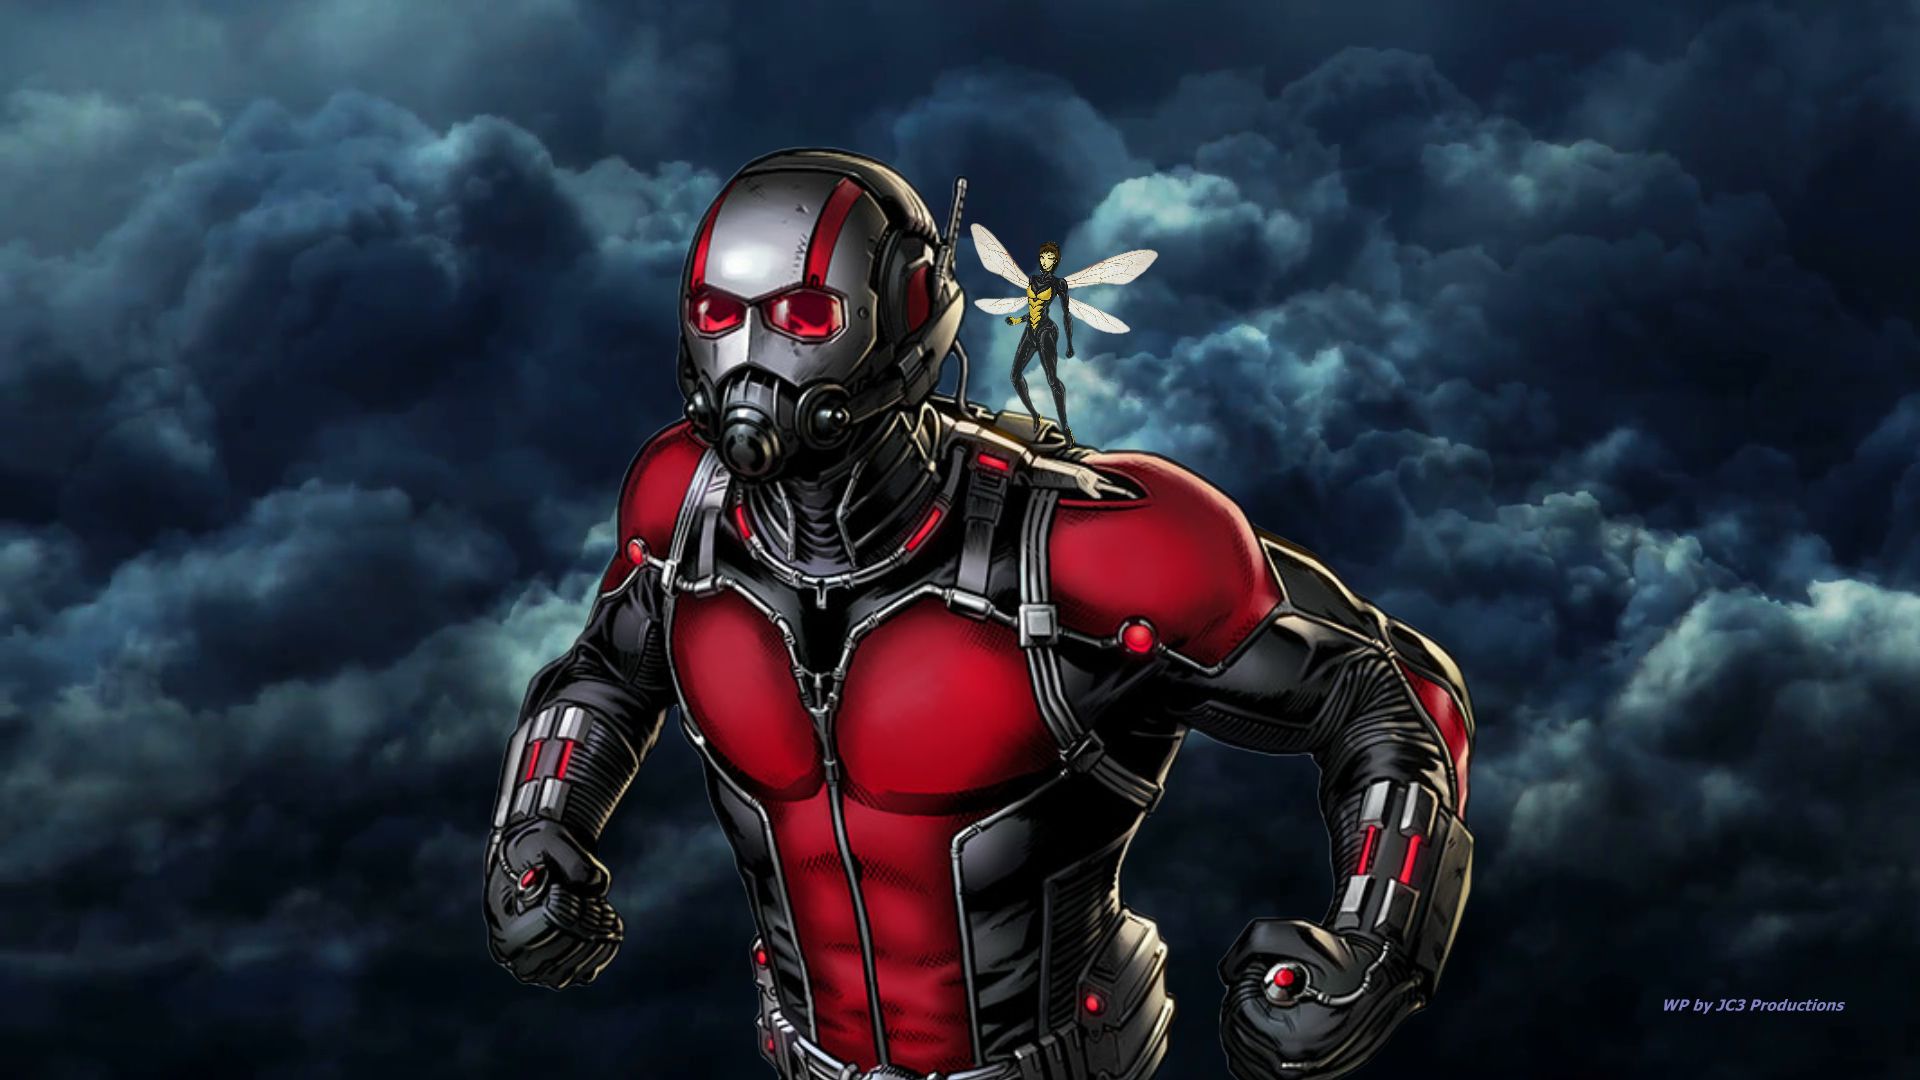 ANT-MAN Wallpaper - The Wasp 2 by Curtdawg53 on DeviantArt